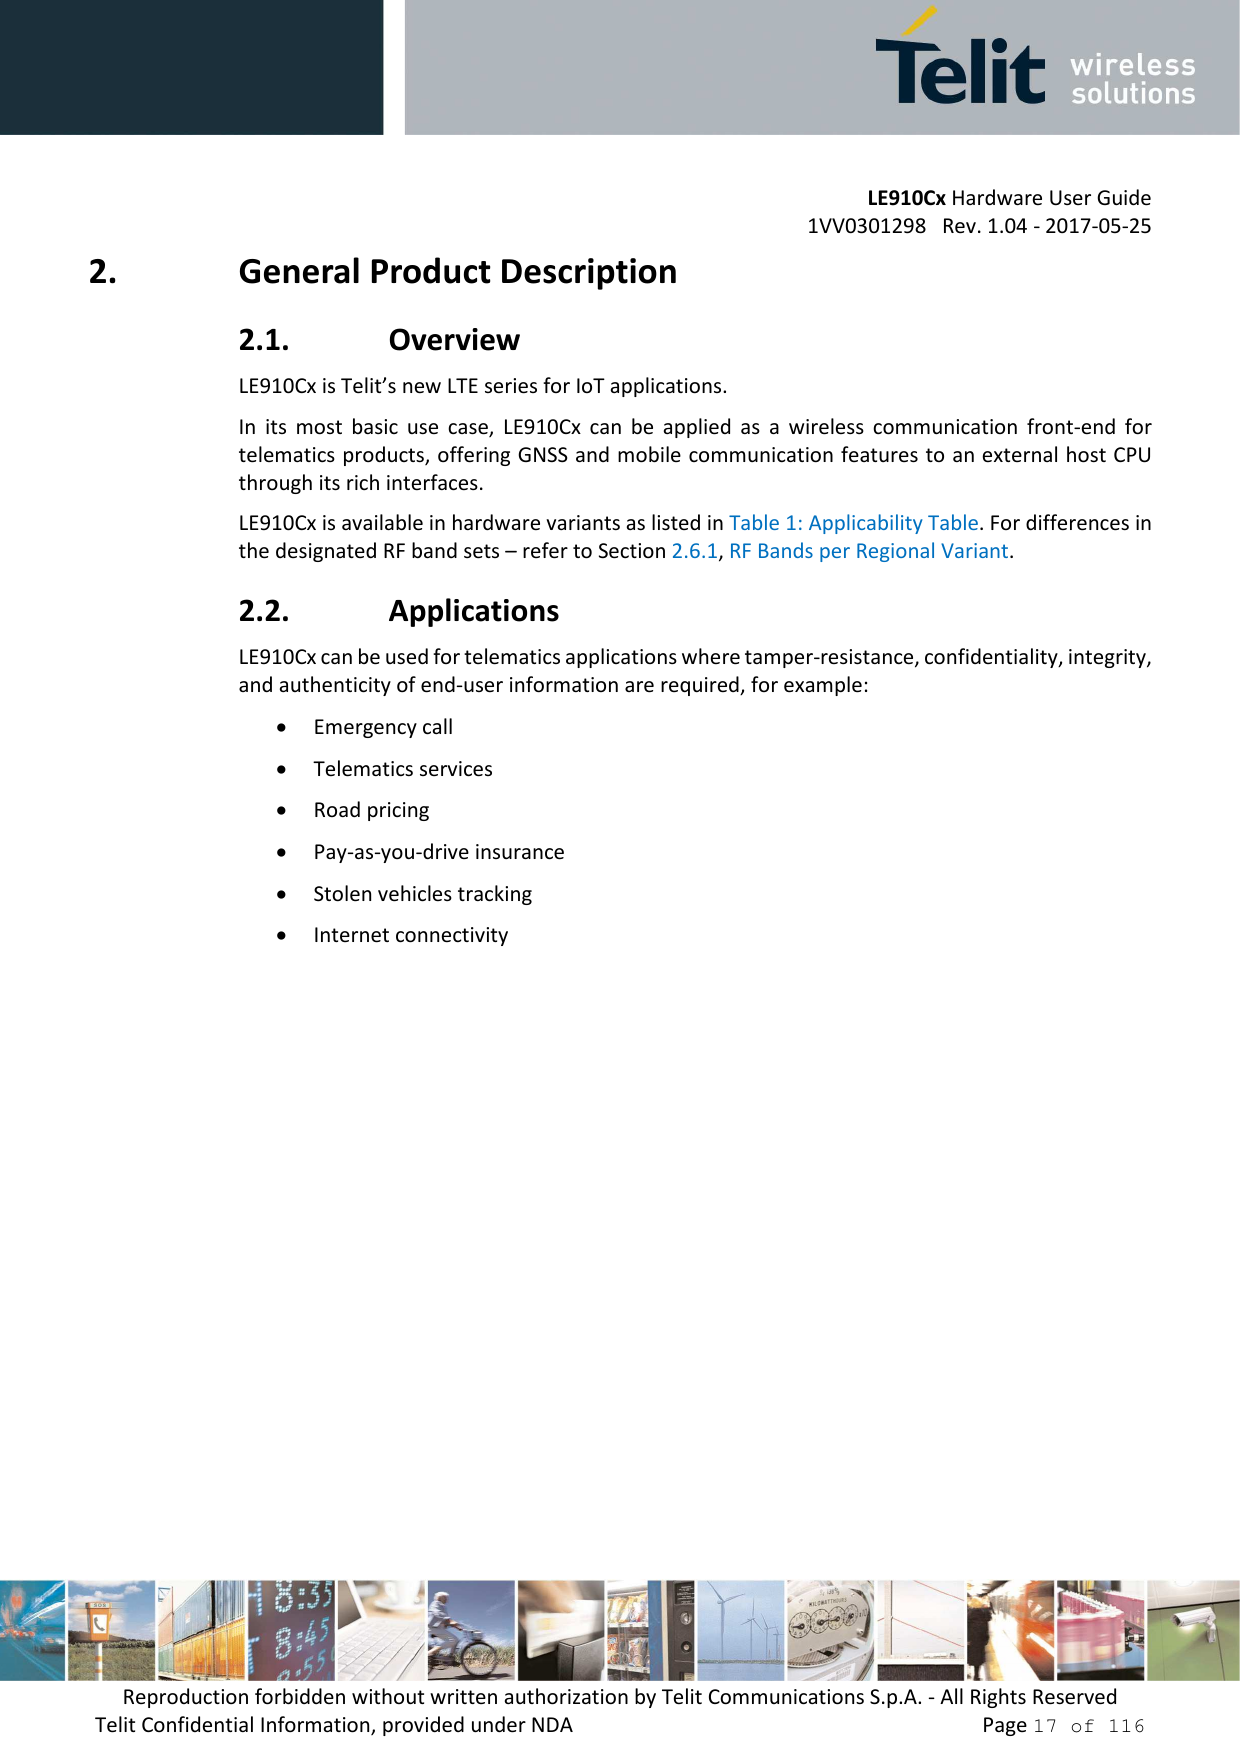         LE910Cx Hardware User Guide 1VV0301298   Rev. 1.04 - 2017-05-25 Reproduction forbidden without written authorization by Telit Communications S.p.A. - All Rights Reserved Telit Confidential Information, provided under NDA                 Page 17 of 116 2. General Product Description 2.1. Overview LE910Cx is Telit’s new LTE series for IoT applications.  In  its  most  basic  use  case,  LE910Cx  can  be  applied  as  a  wireless  communication  front-end  for telematics products, offering GNSS and mobile communication features to an external host CPU through its rich interfaces. LE910Cx is available in hardware variants as listed in Table 1: Applicability Table. For differences in the designated RF band sets – refer to Section 2.6.1, RF Bands per Regional Variant. 2.2. Applications LE910Cx can be used for telematics applications where tamper-resistance, confidentiality, integrity, and authenticity of end-user information are required, for example: • Emergency call • Telematics services • Road pricing • Pay-as-you-drive insurance • Stolen vehicles tracking • Internet connectivity    